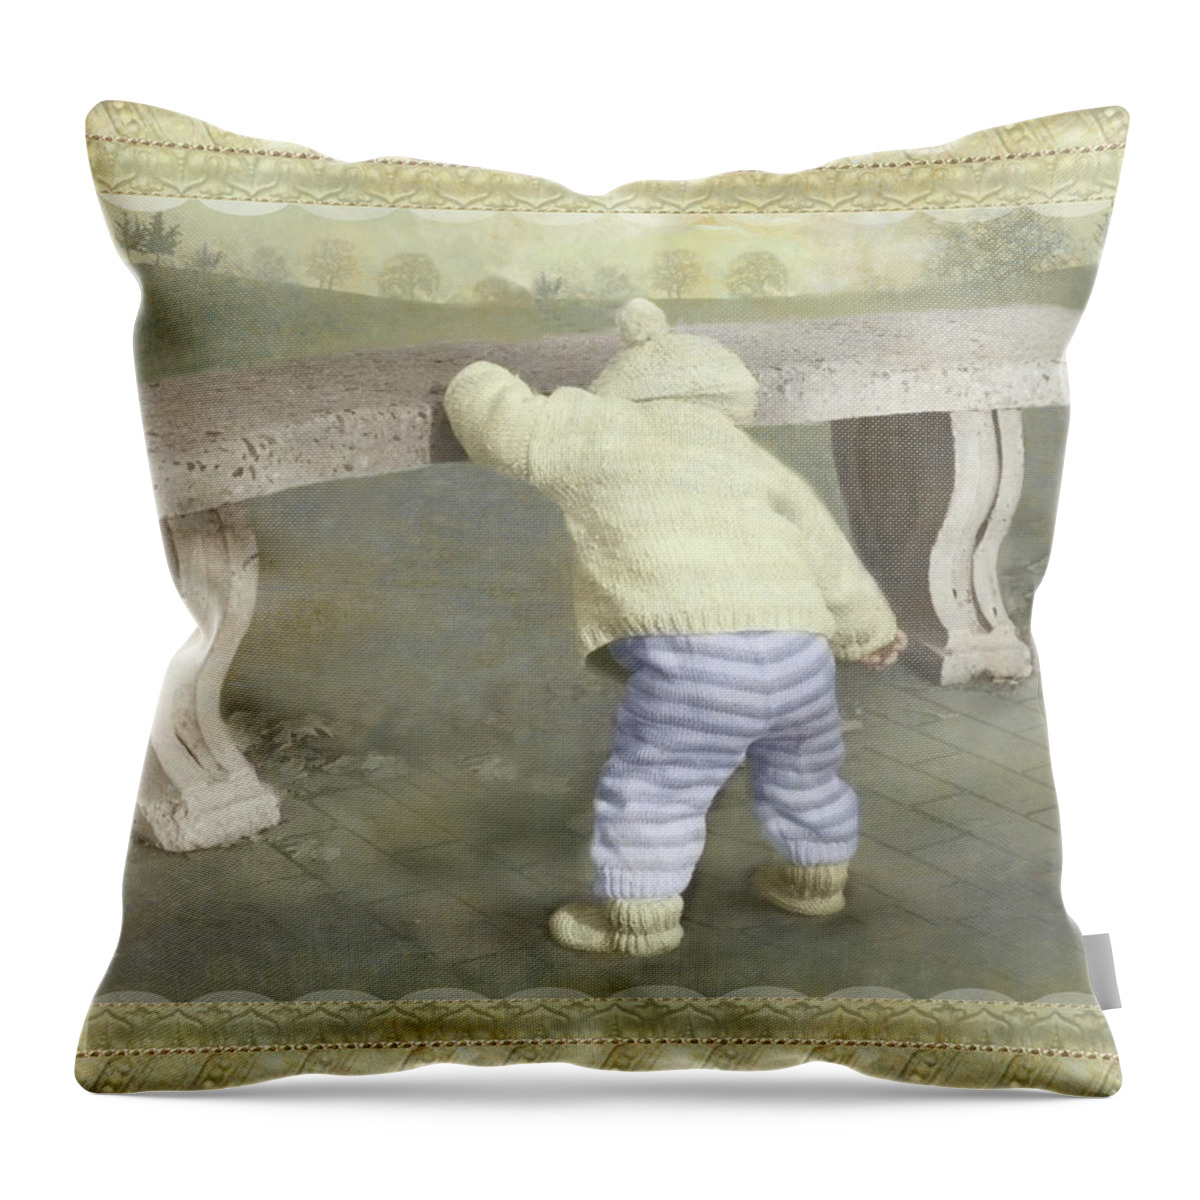  Throw Pillow featuring the photograph Is Bunny Under The Bench? by Adele Aron Greenspun